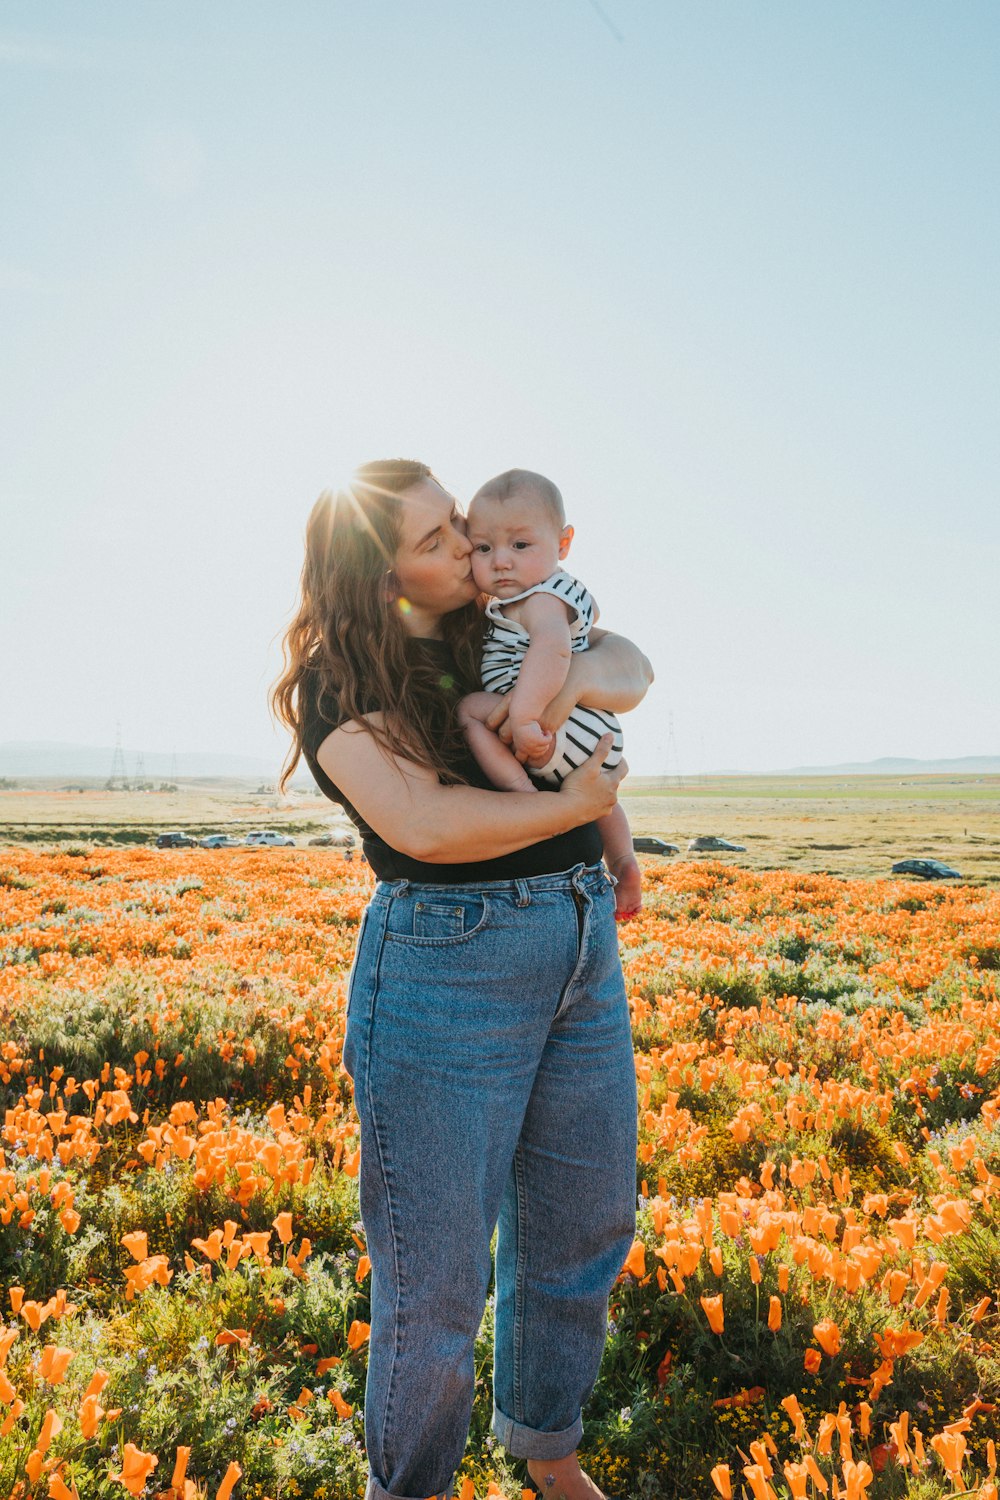 woman in black tank top and blue denim jeans carrying baby in white shirt on flower